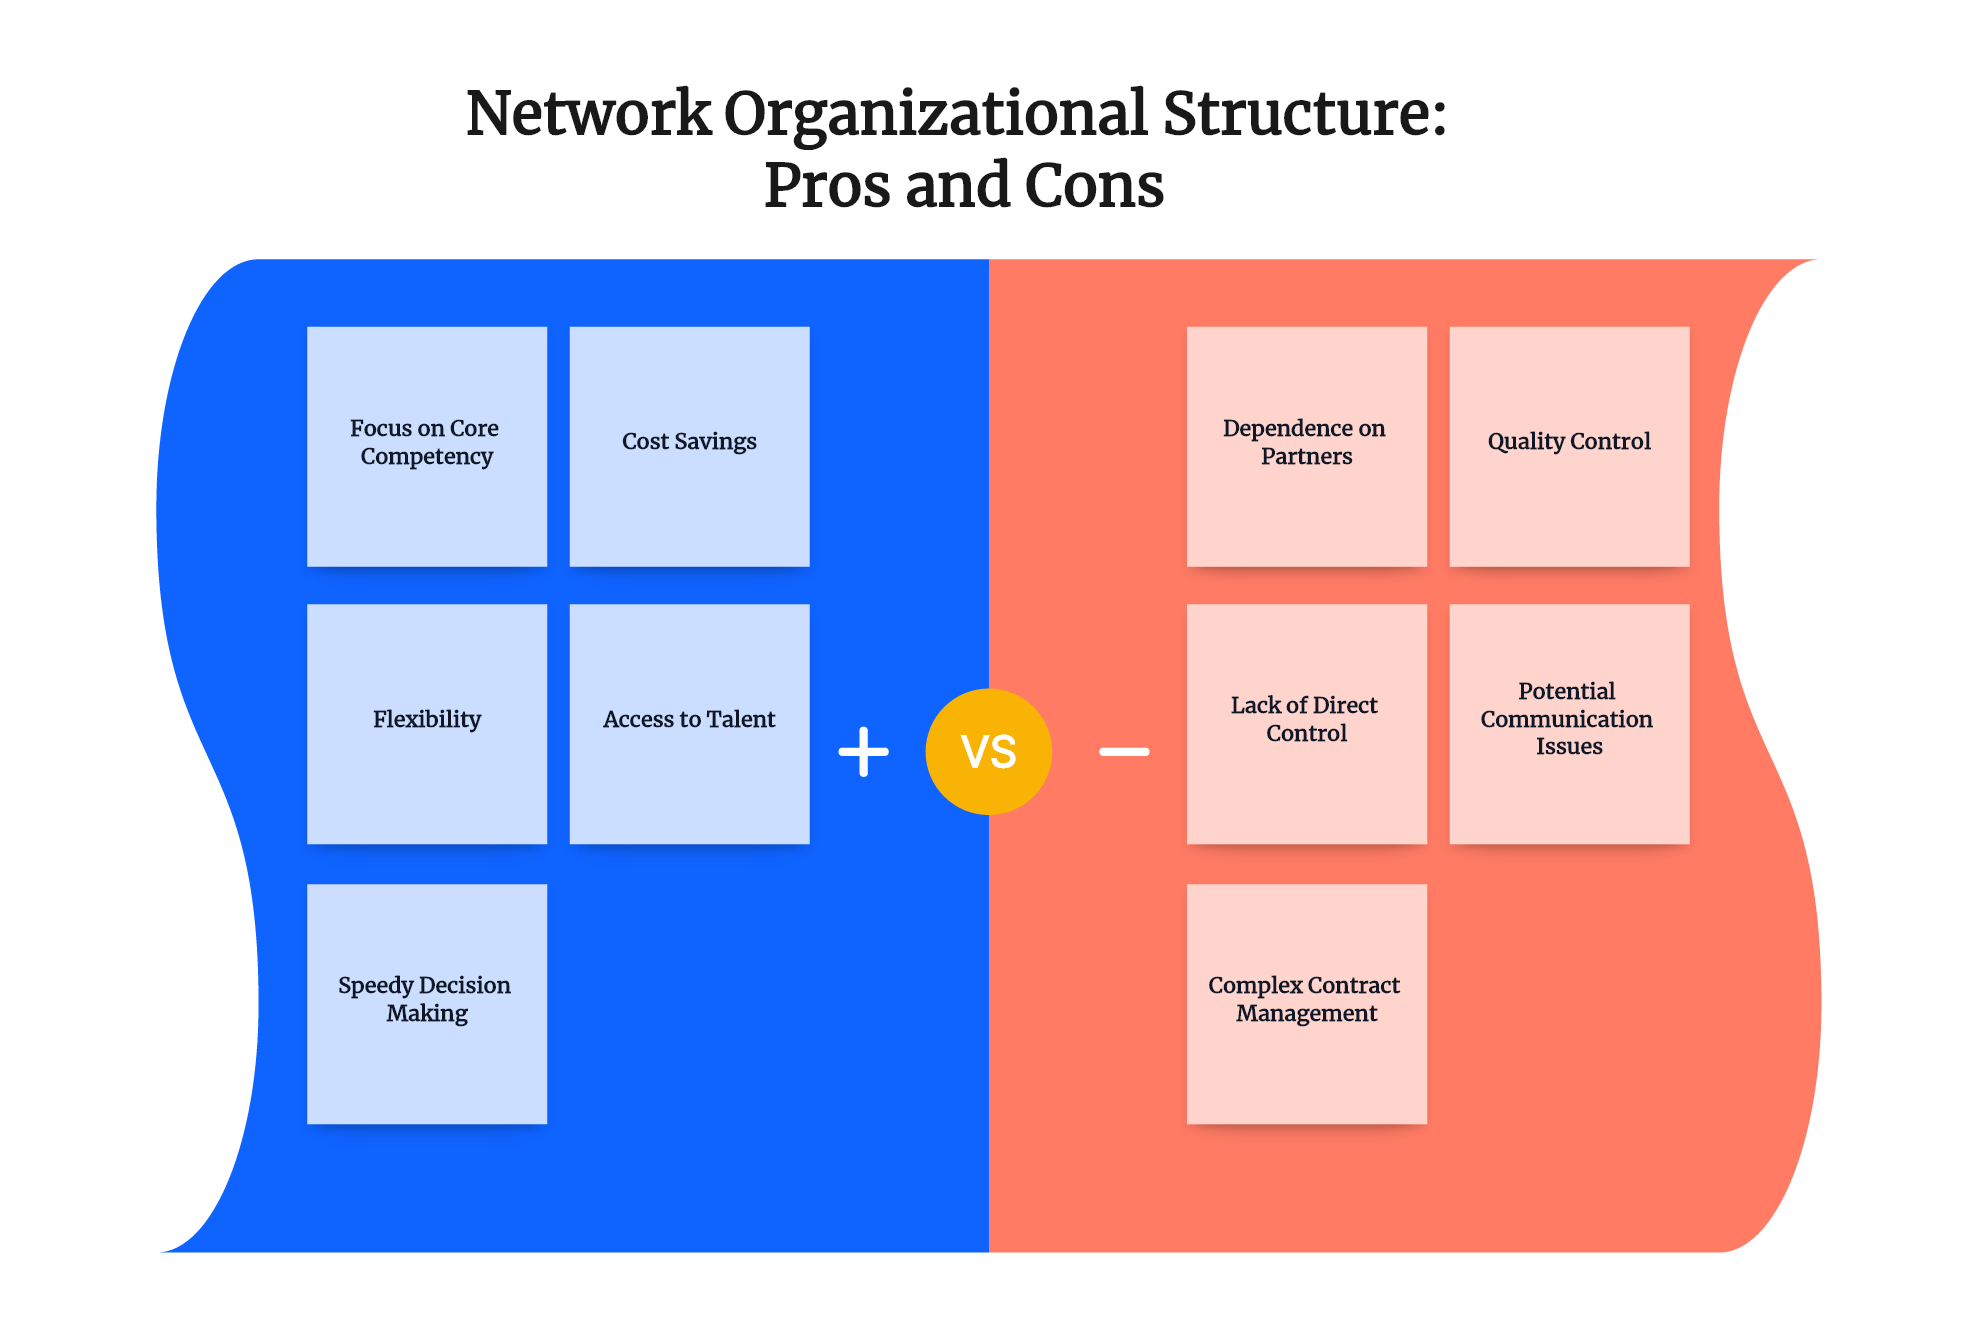 Network Organizational Structure: Pros and Cons